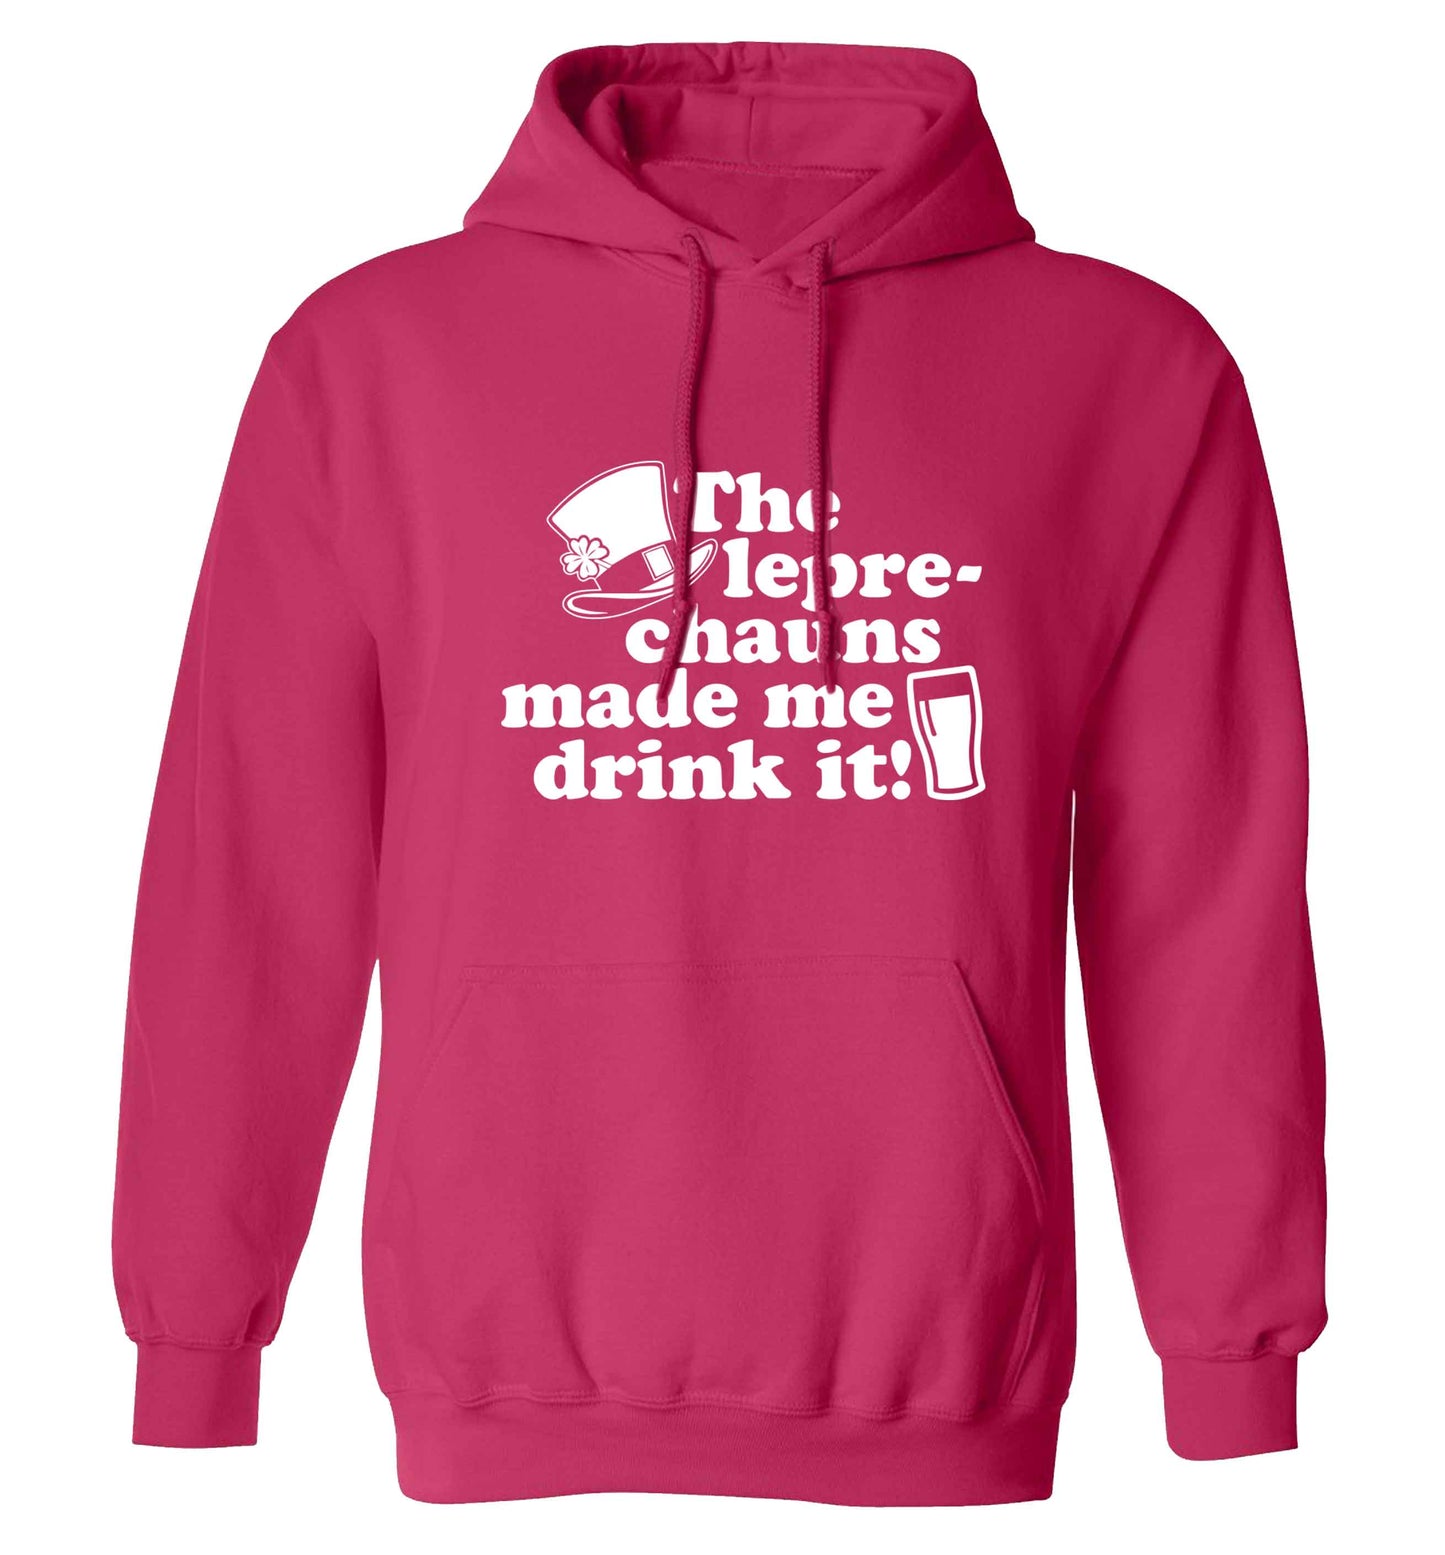 The leprechauns made me drink it adults unisex pink hoodie 2XL